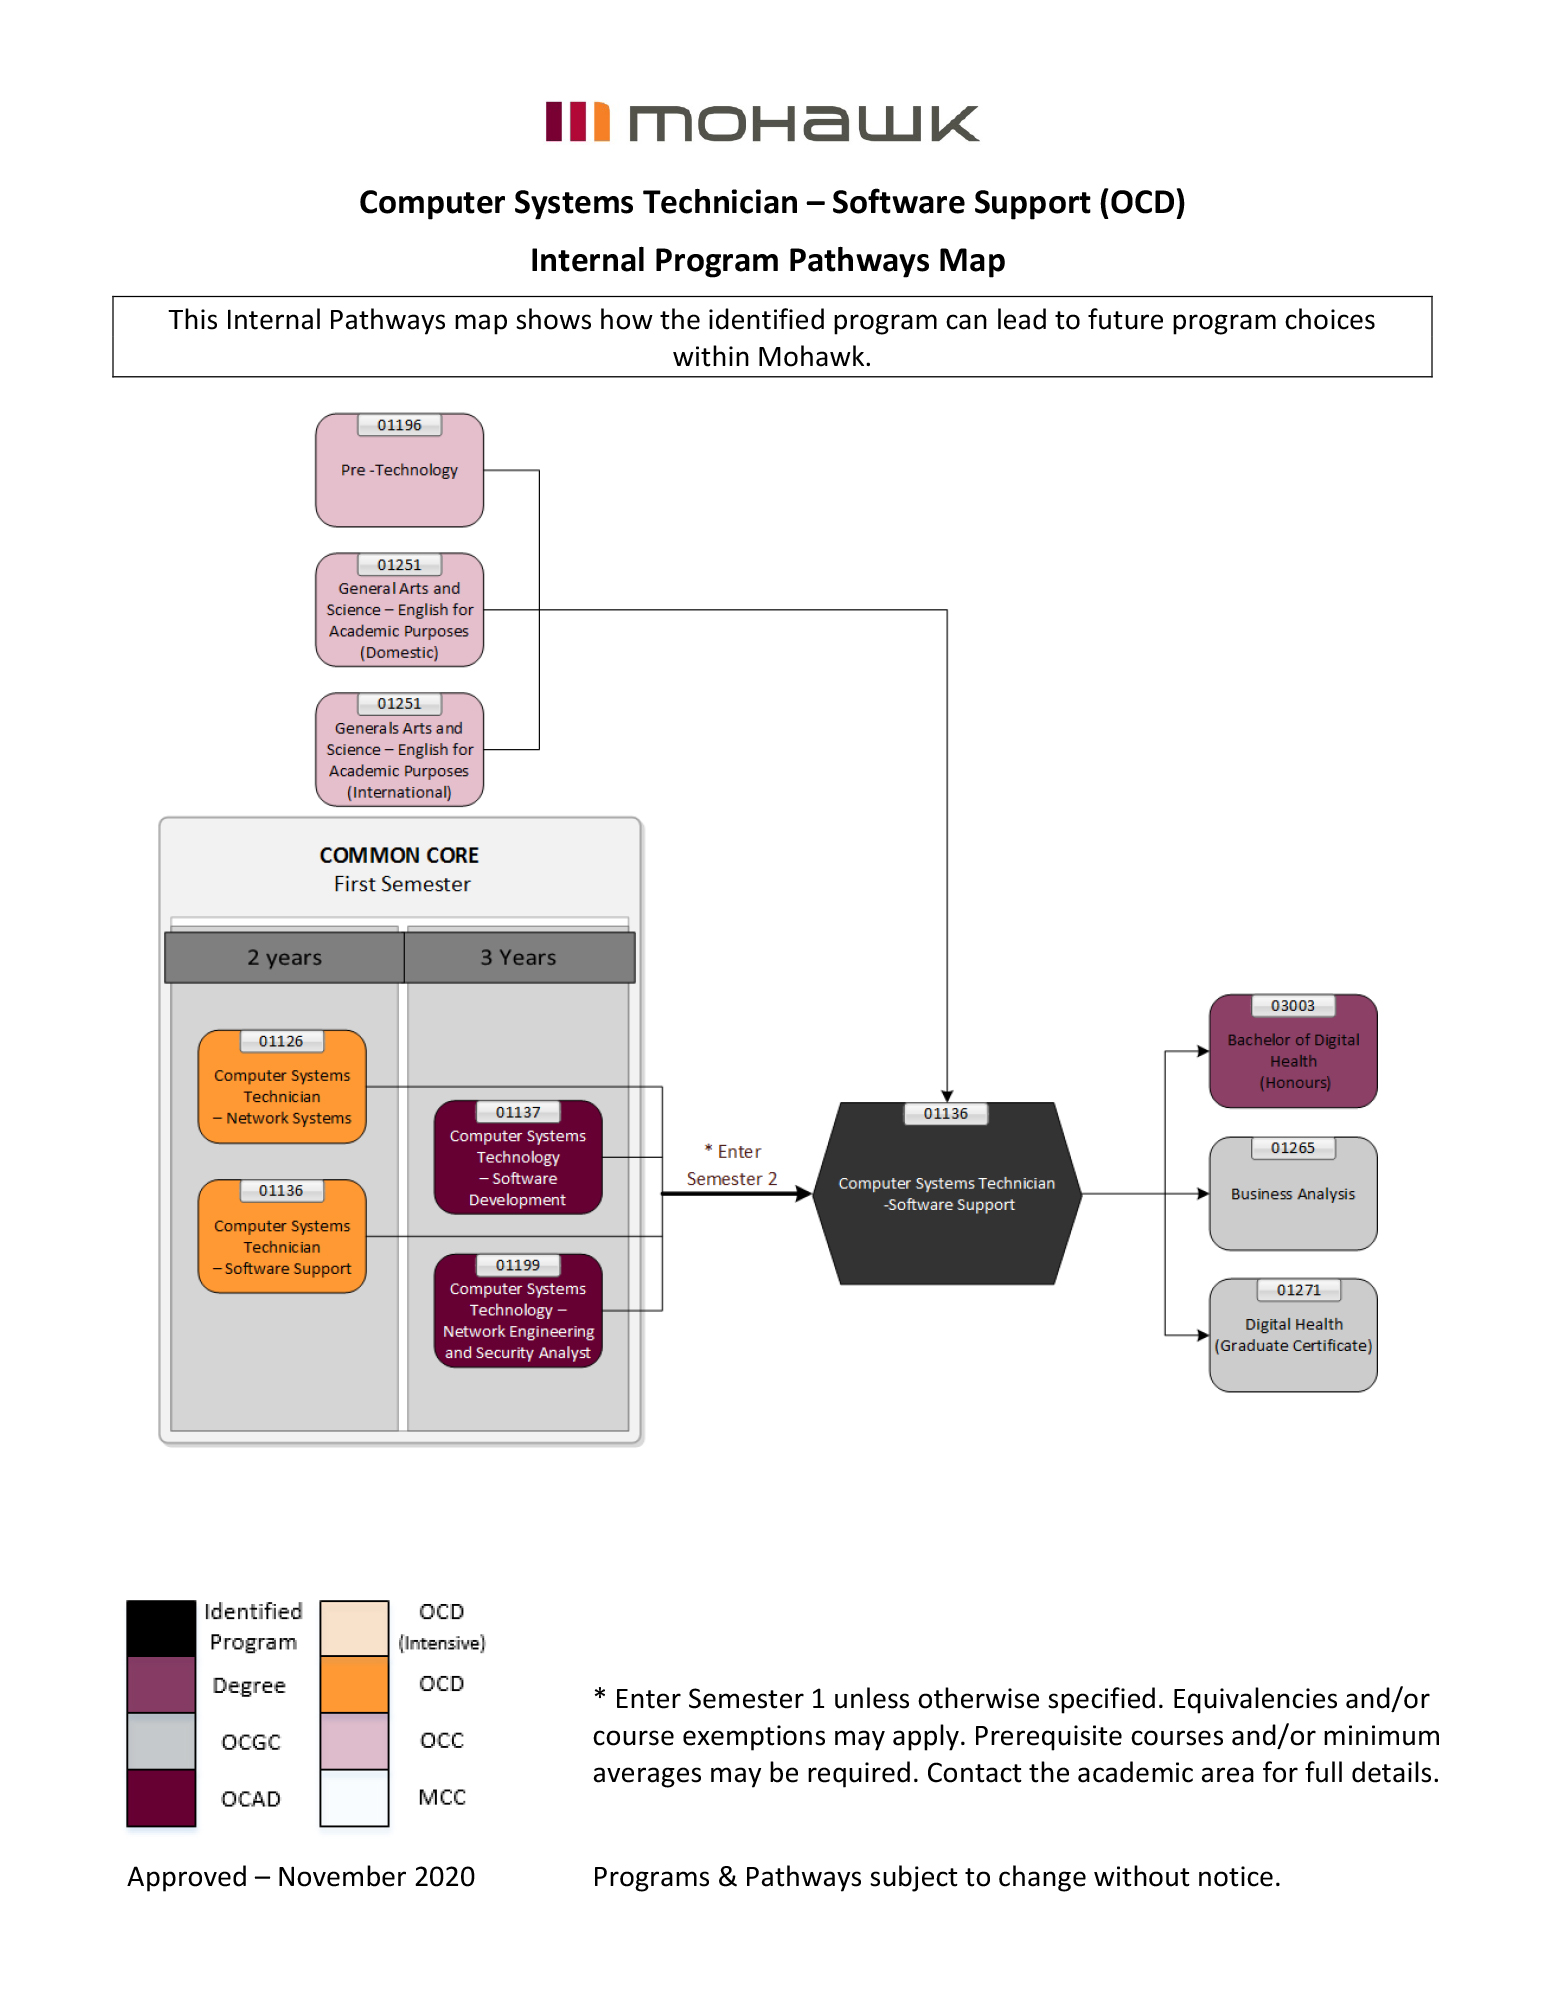 Computer Systems Technician Software Support pathways map